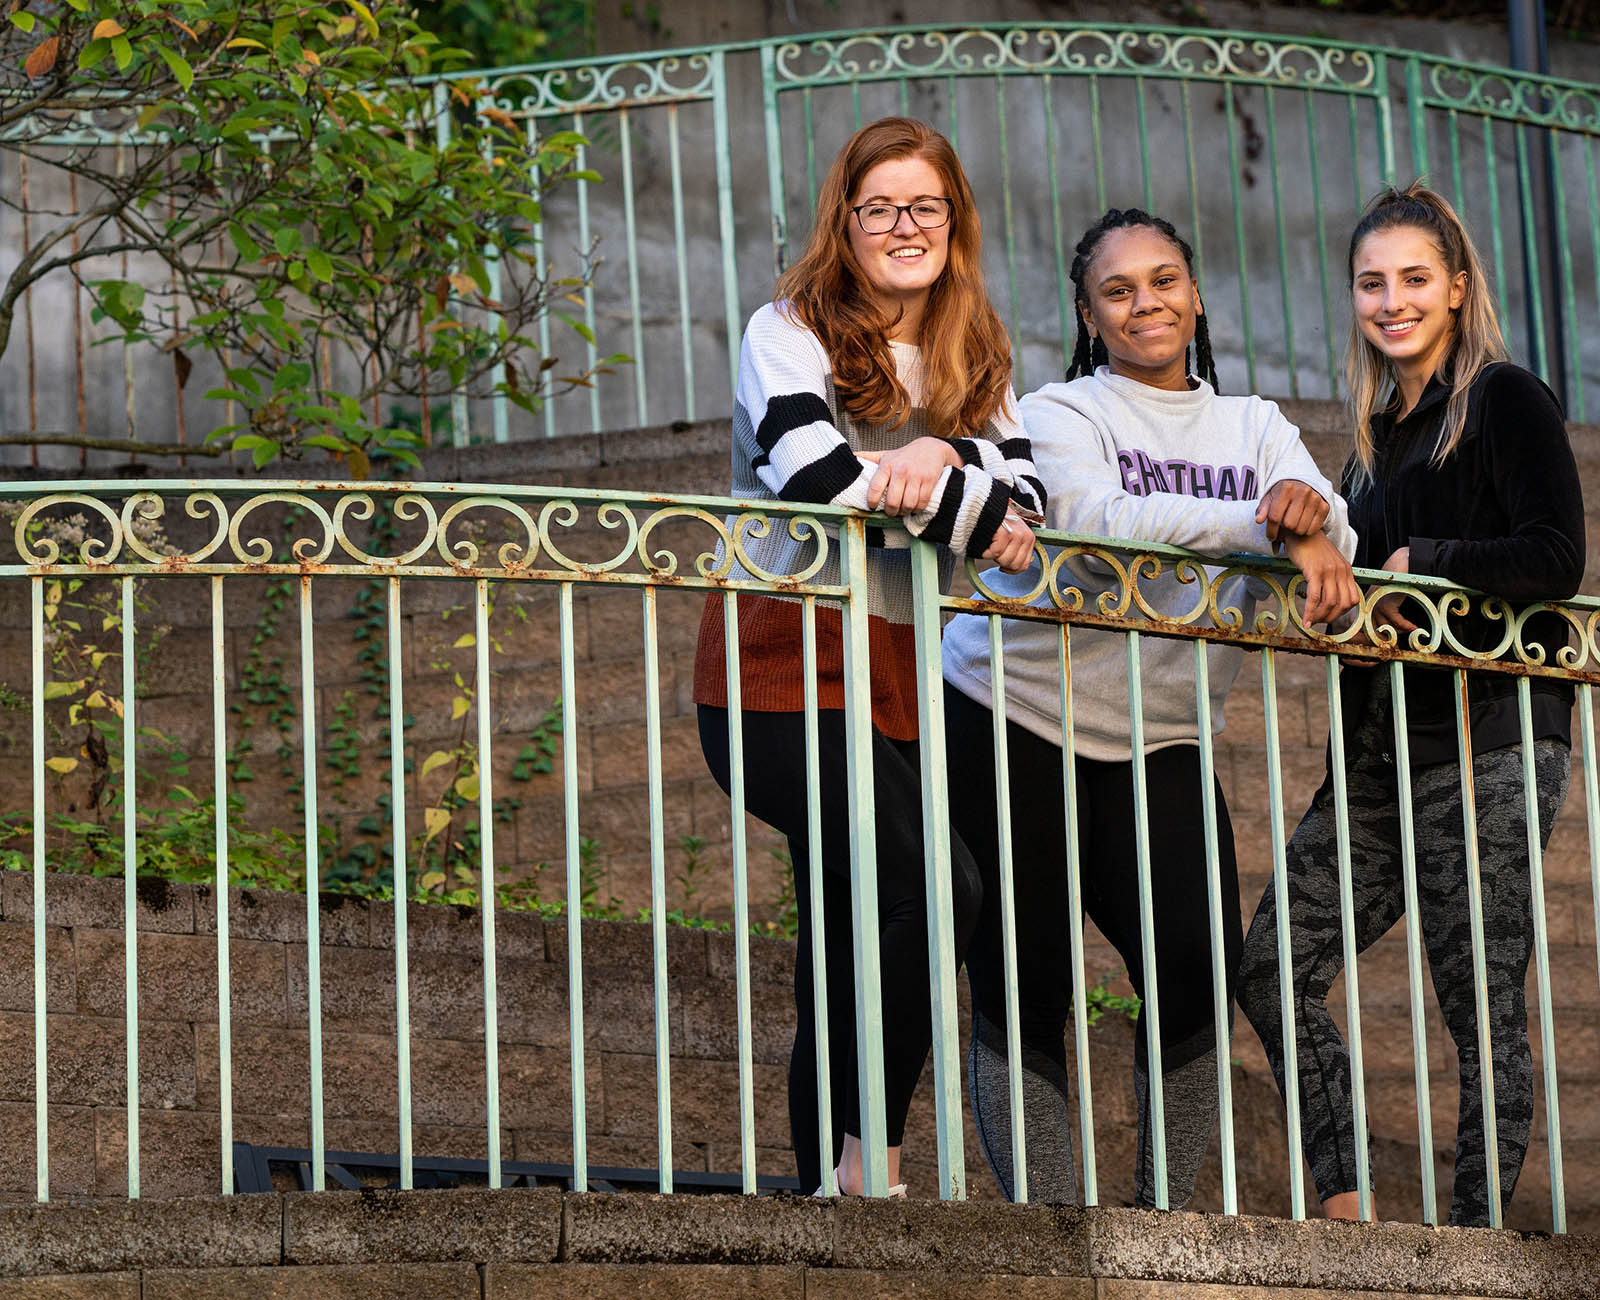 Photo of third-year entry-level Doctor of Occupational Therapy students Emily Smith, Dominique Peterson, and Kayla Raybuck posing against a fence at Vincentian Schenley Gardens